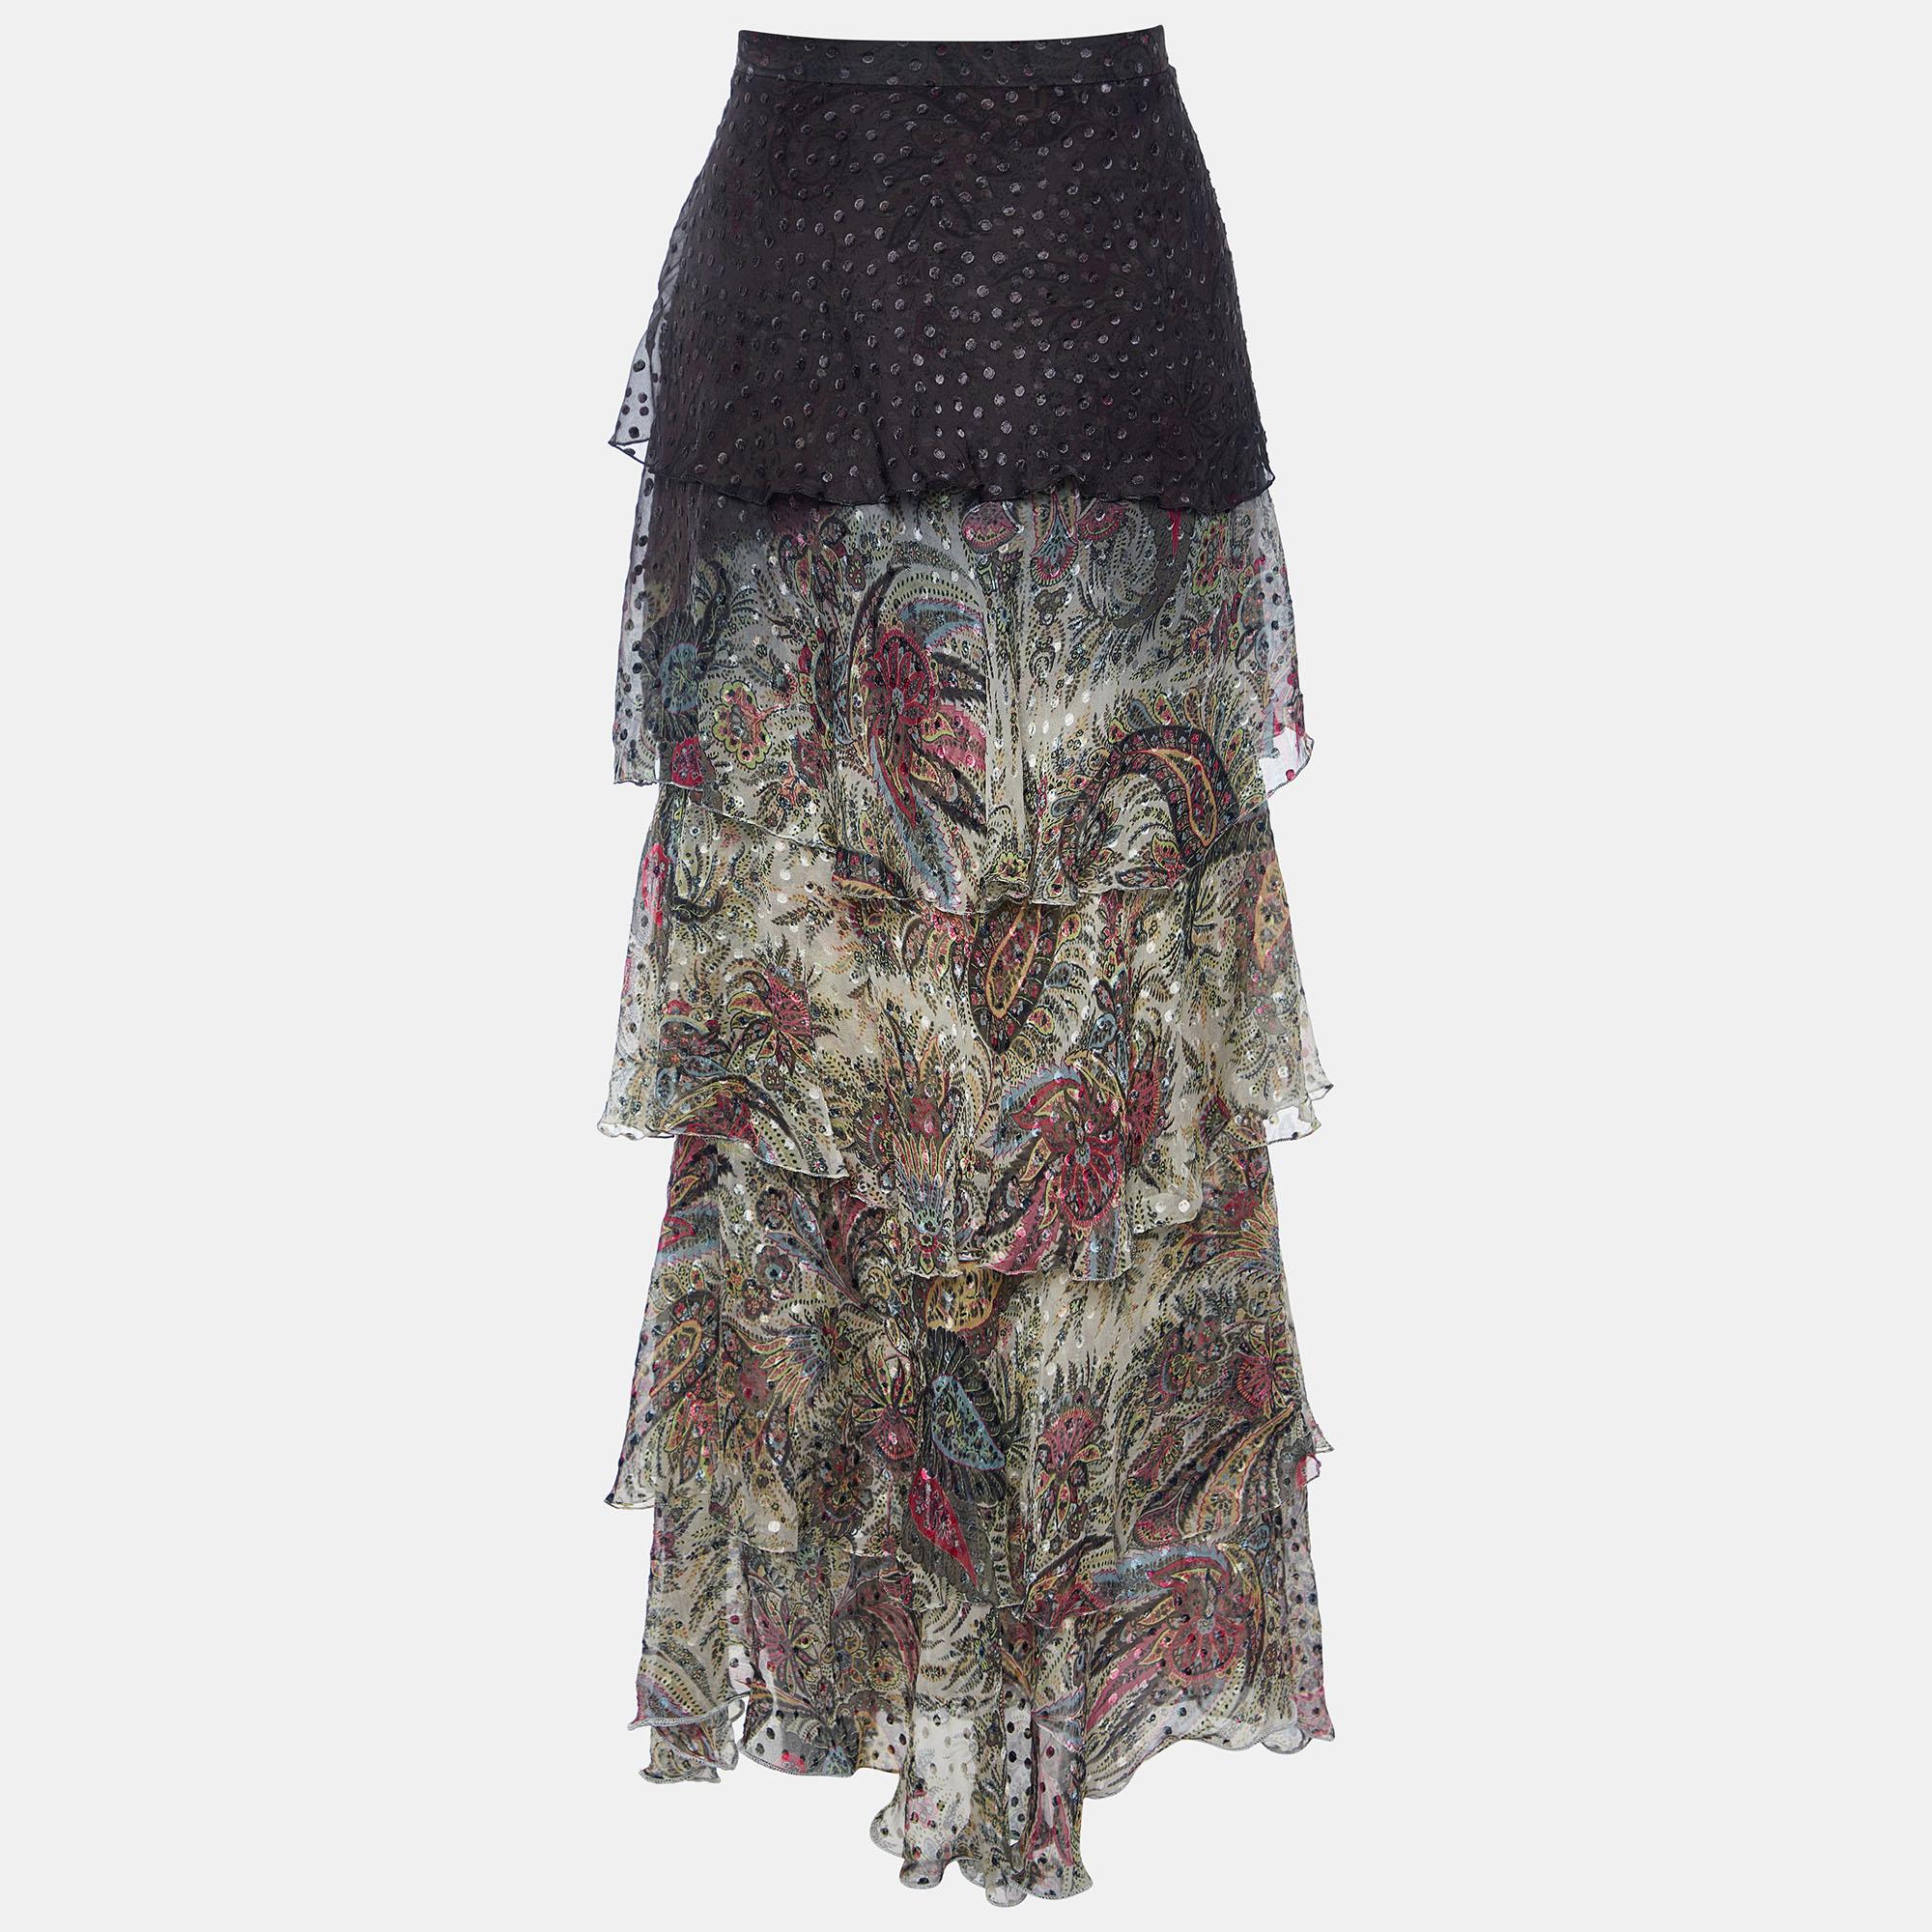 Treat yourself to this gorgeous skirt from Etro. Tailored using silk blend fabric, the skirt has paisley prints and beautiful tiers to create a lovely shape.

